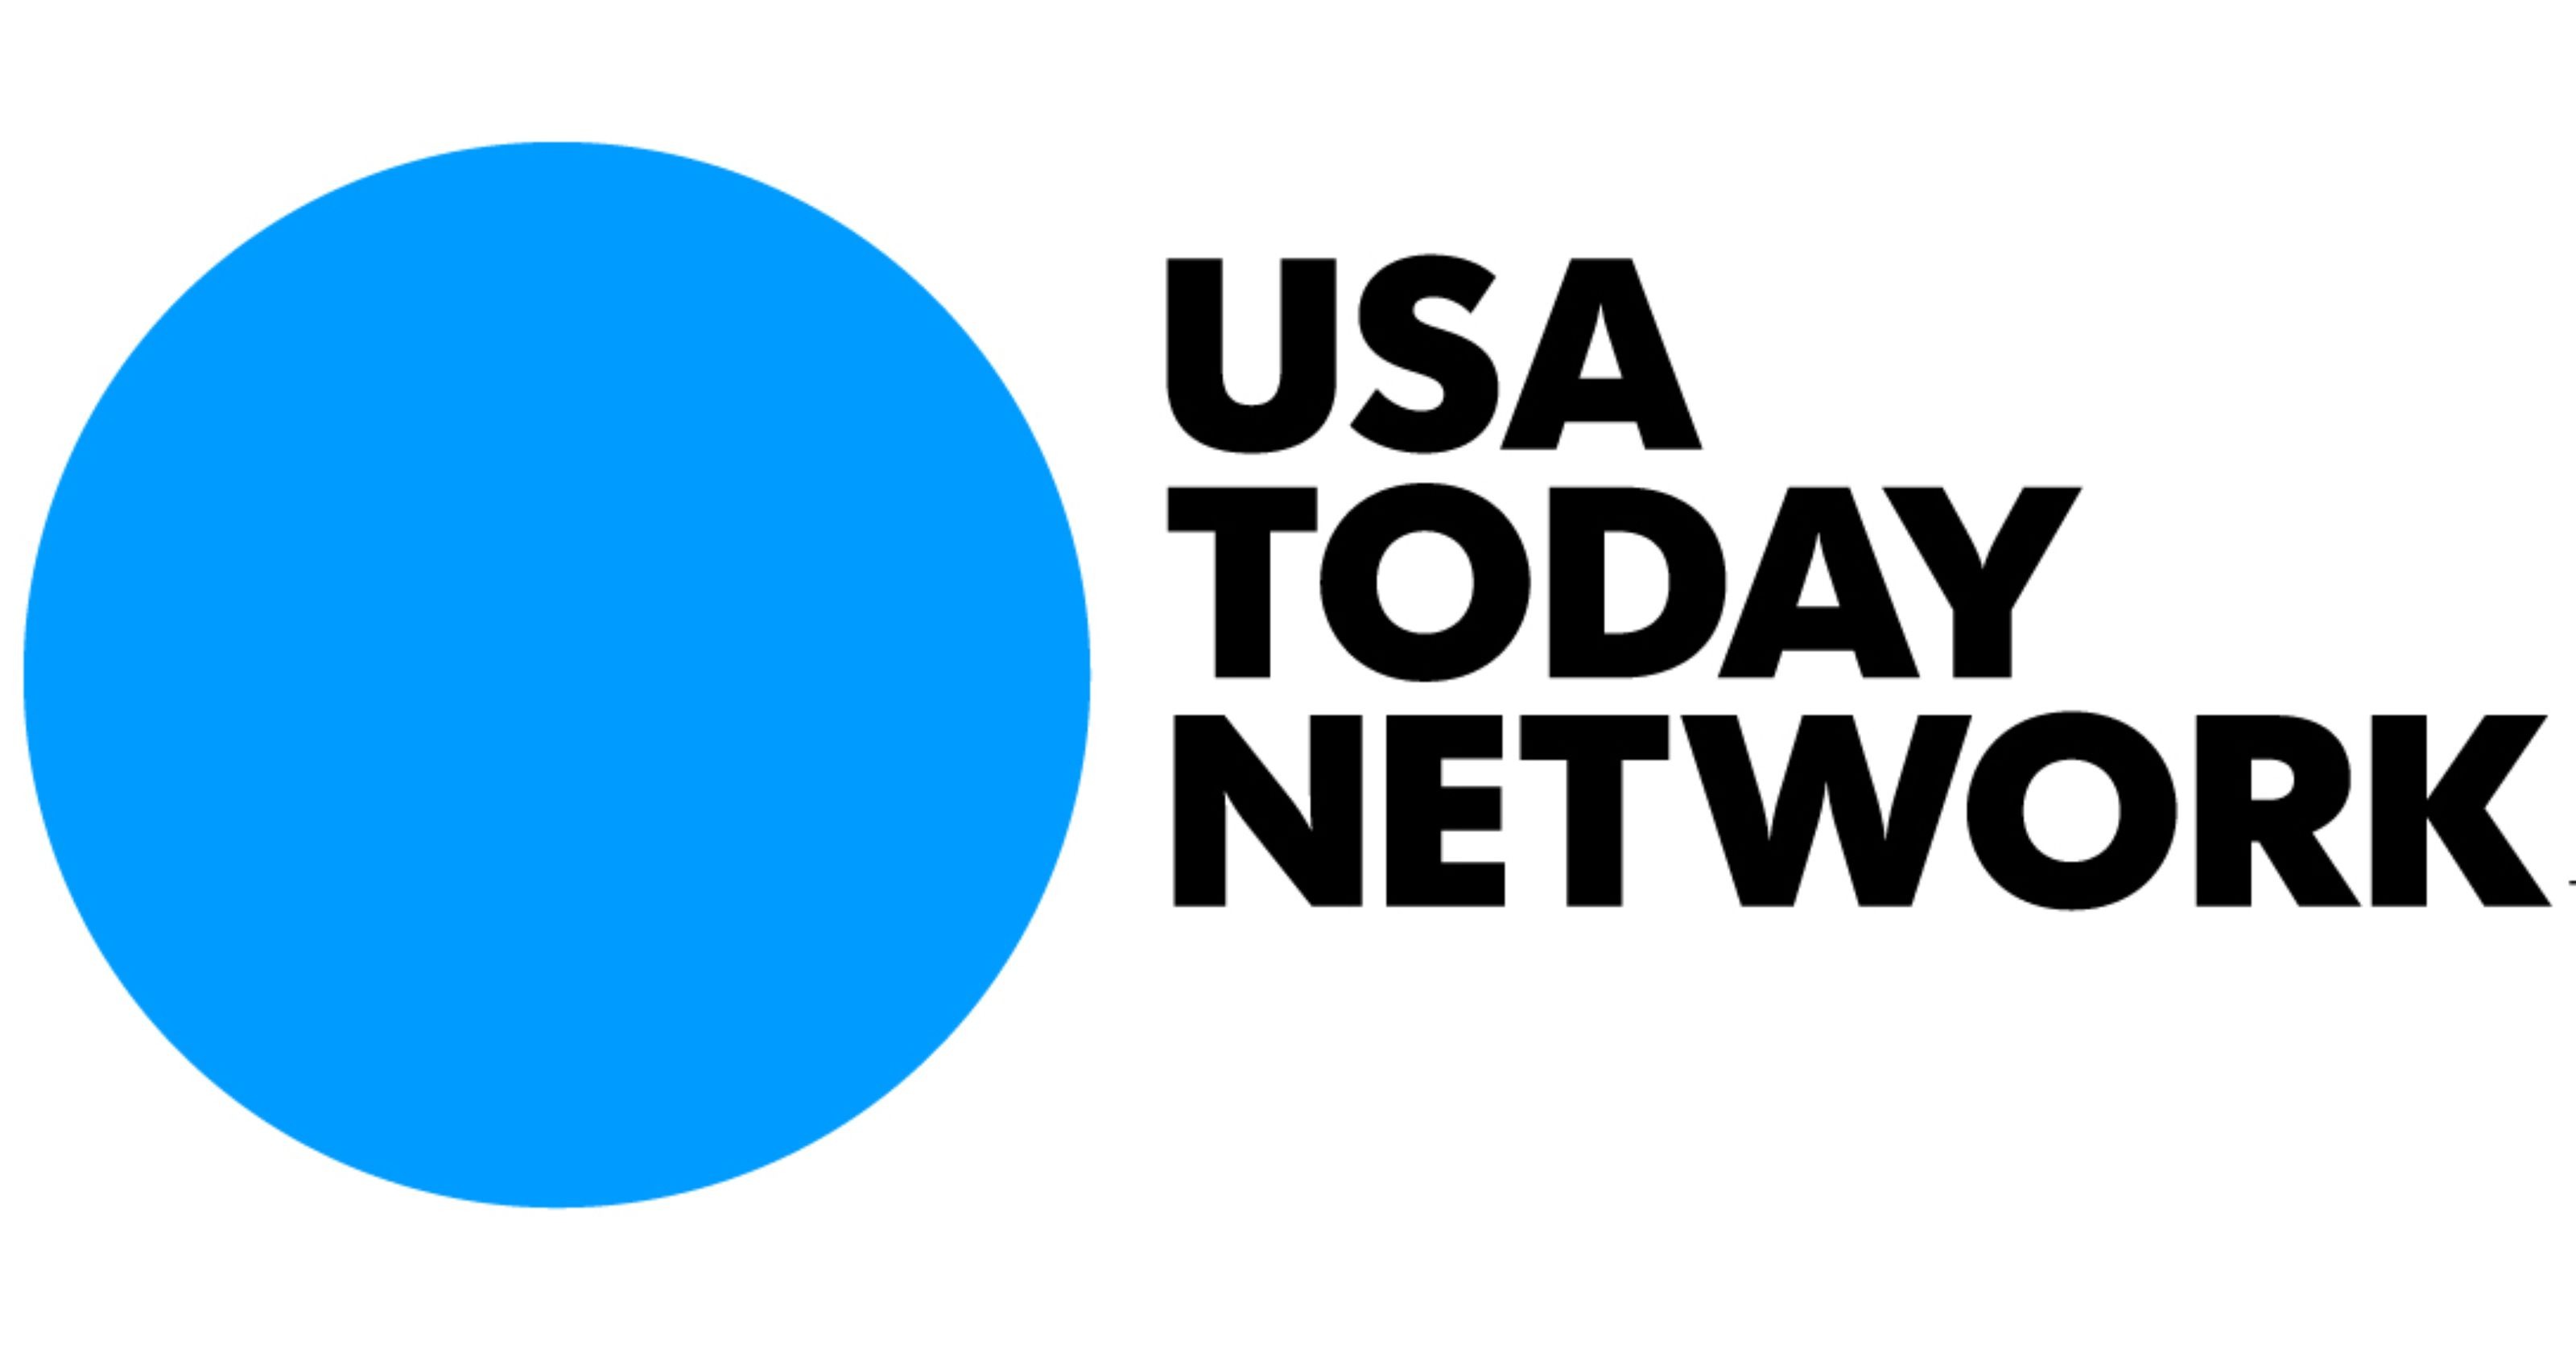 Elevating the USA TODAY NETWORK Brand: More Than a Newspaper Company - Logo - https://s39939.pcdn.co/wp-content/uploads/2018/08/usatodaynetwork-logo.jpg